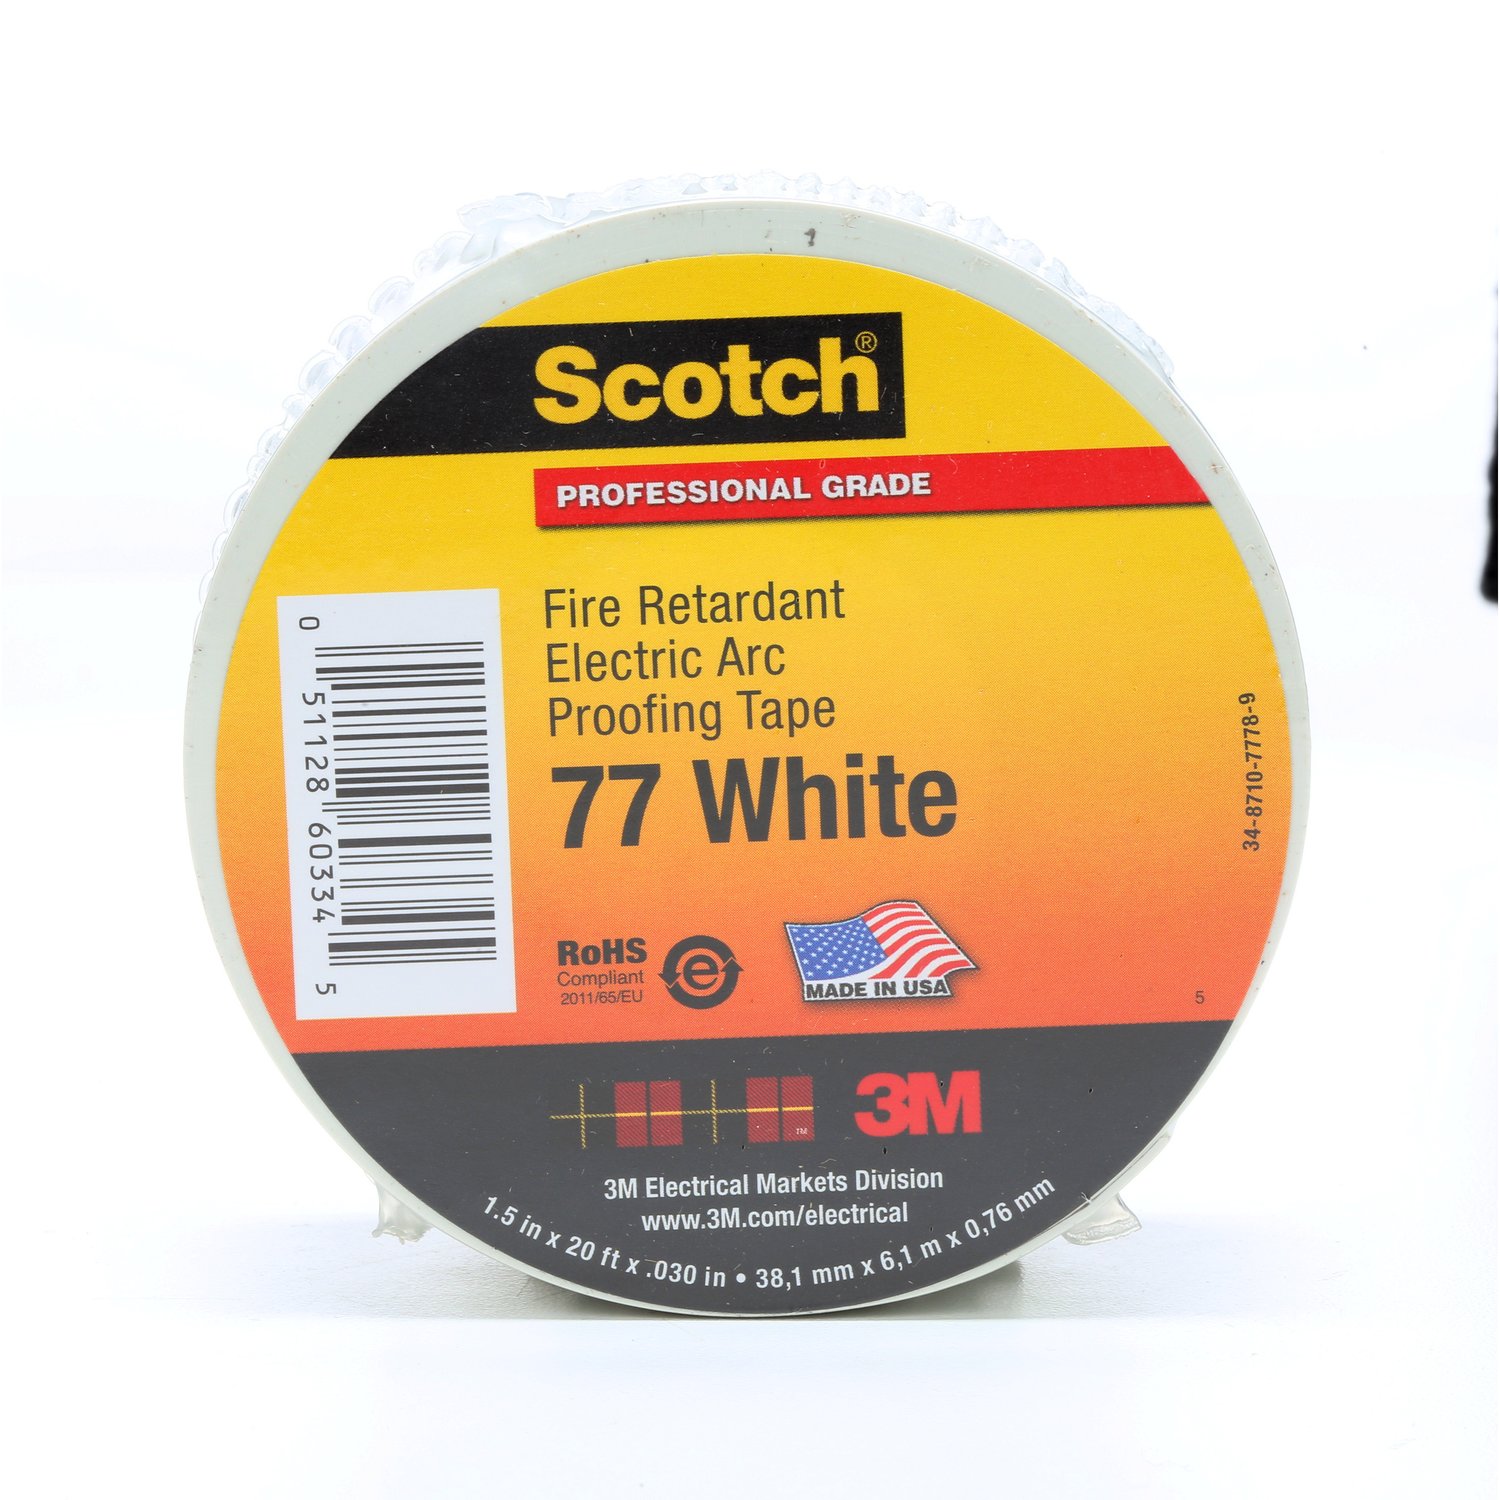 7100080070 - Scotch Fire-Retardant Electric Arc Proofing Tape 77W, 1-1/2 in x 20 ft,
White/Gray, 1 roll/carton, 10 rolls/Case